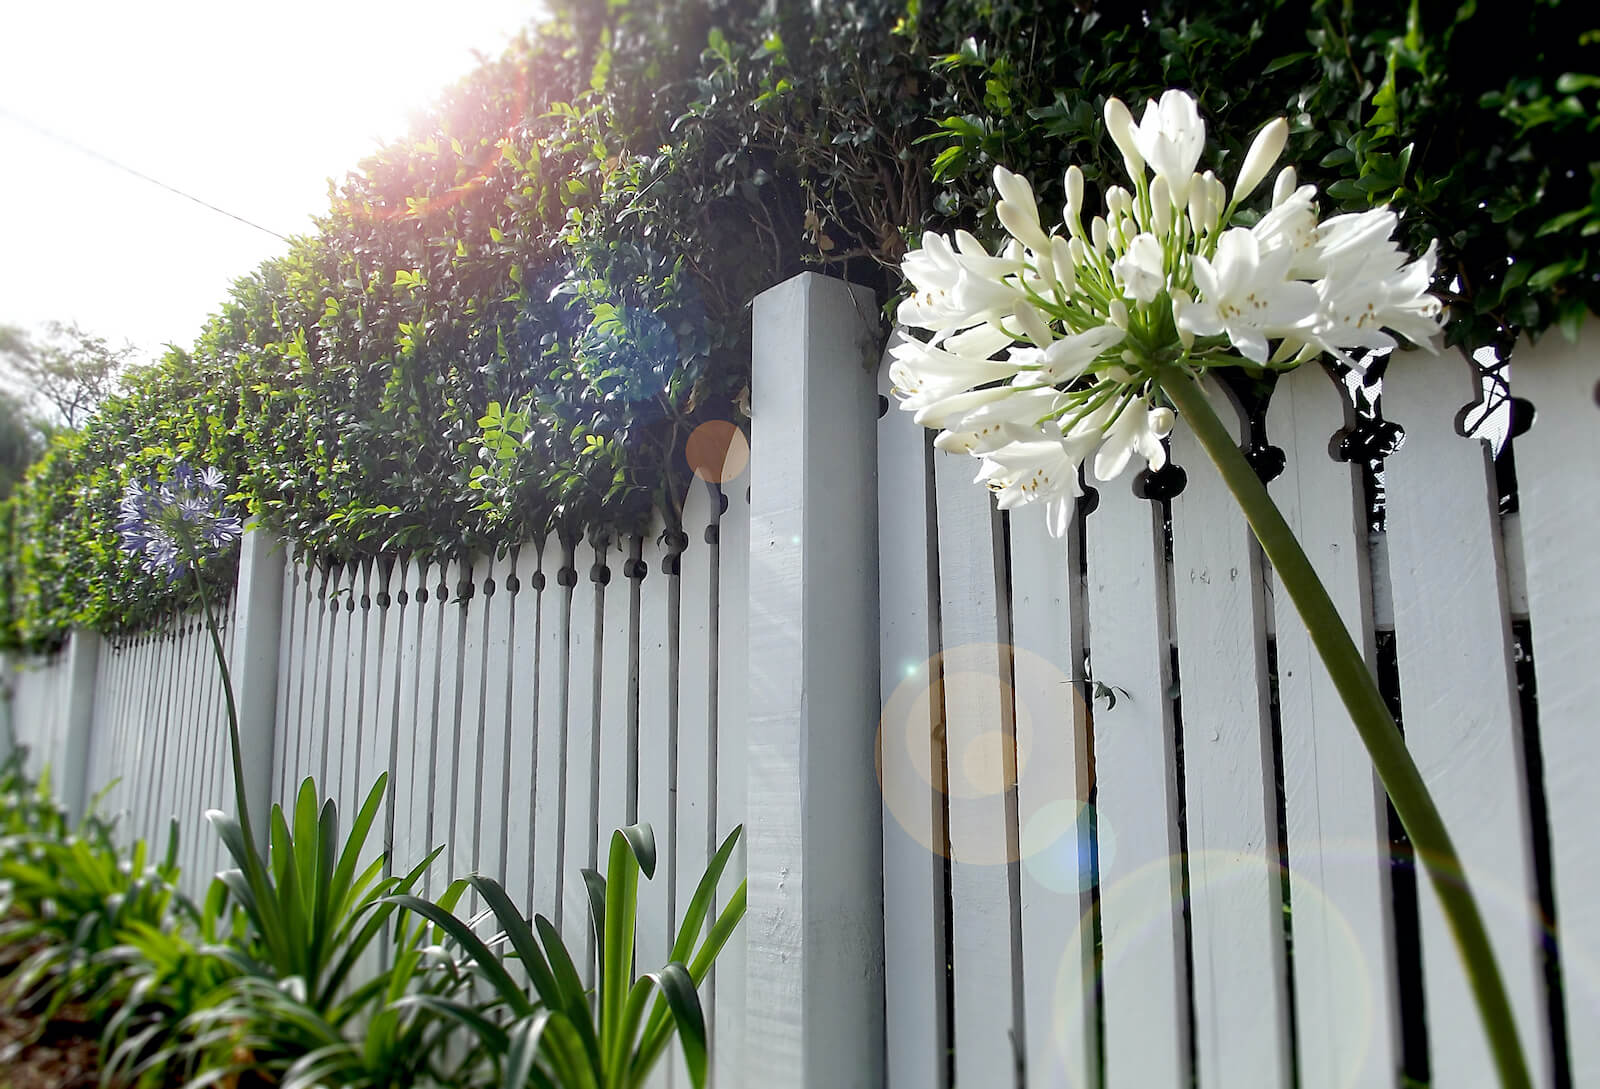 A white fence offers privacy and security.